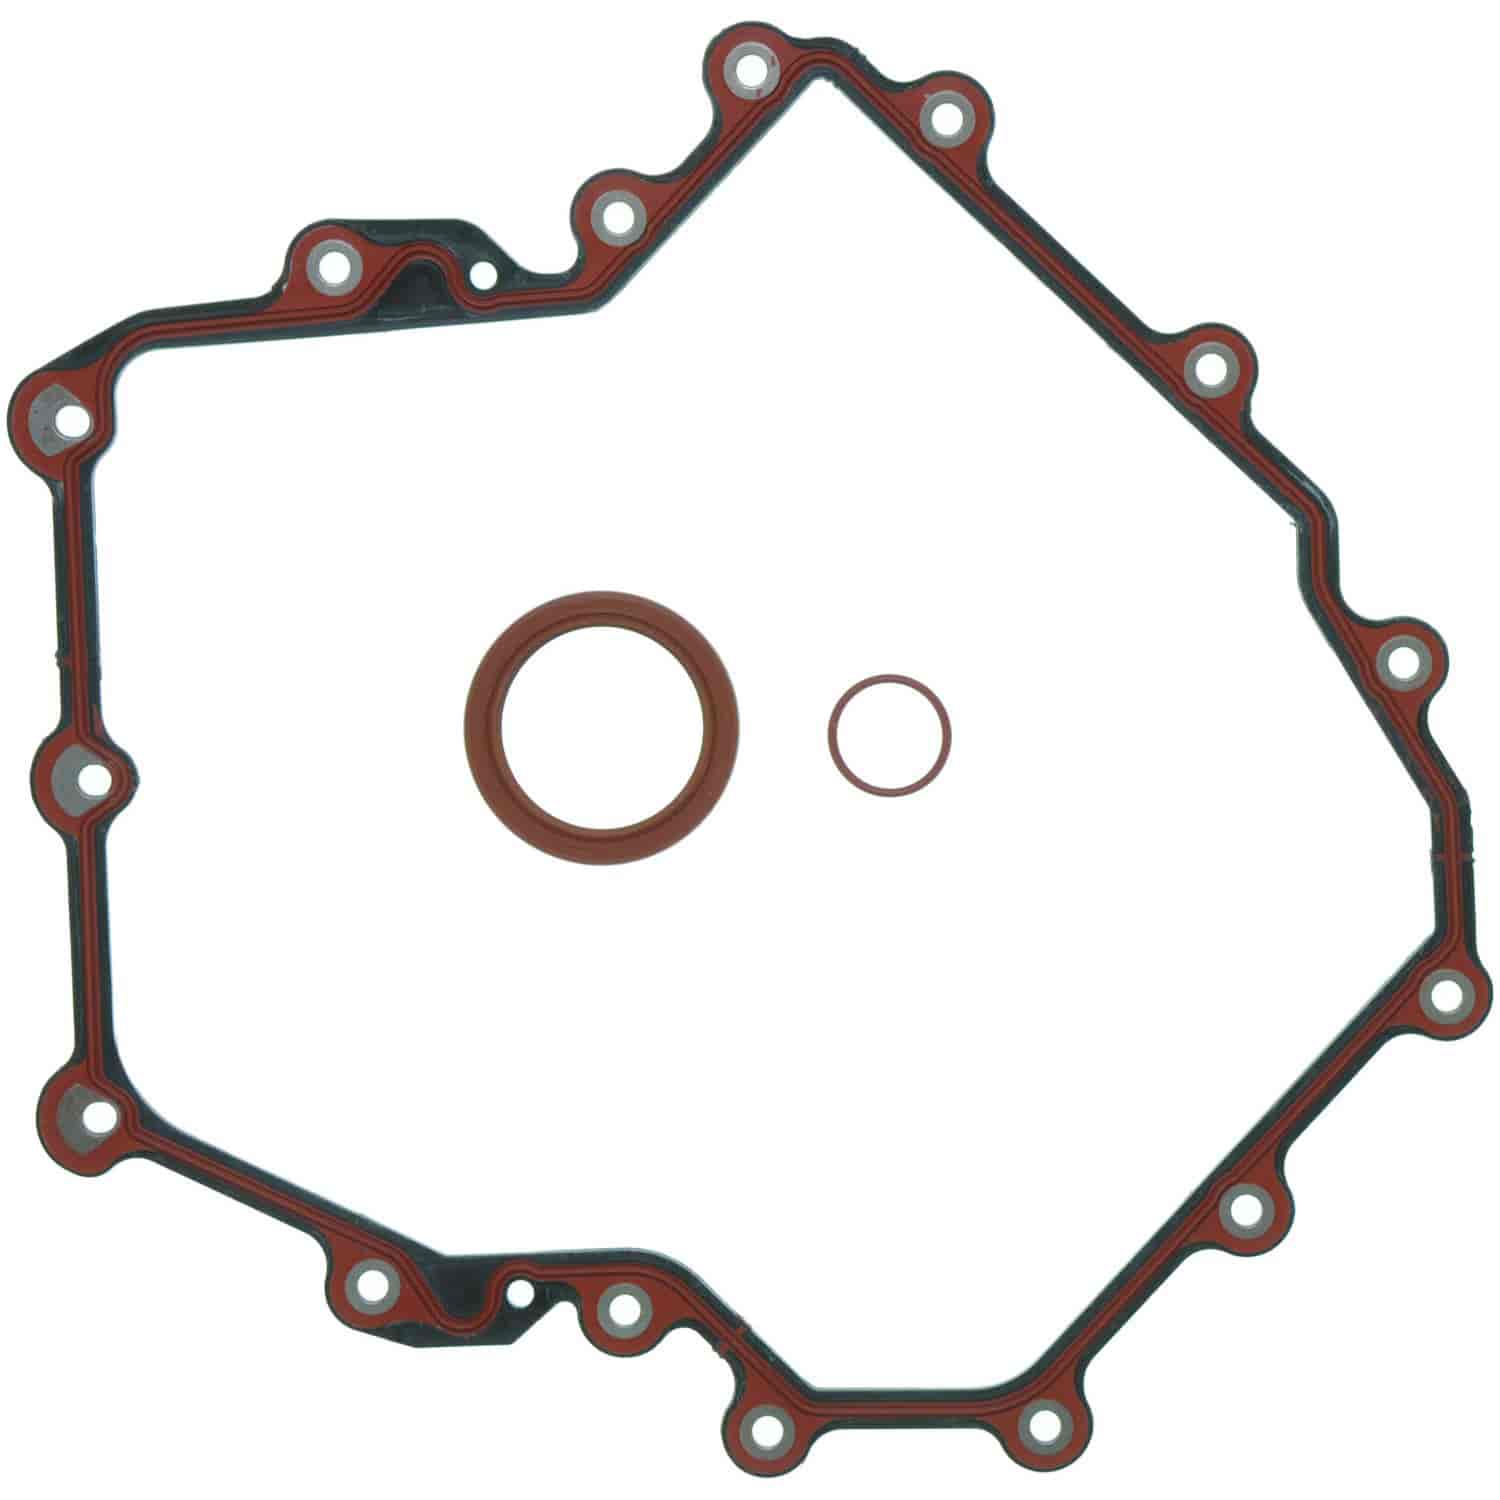 Timing Cover Set Cad. Northstar 4.6L 93-98 1st Design W/O Part# Stamped On Timing Cover